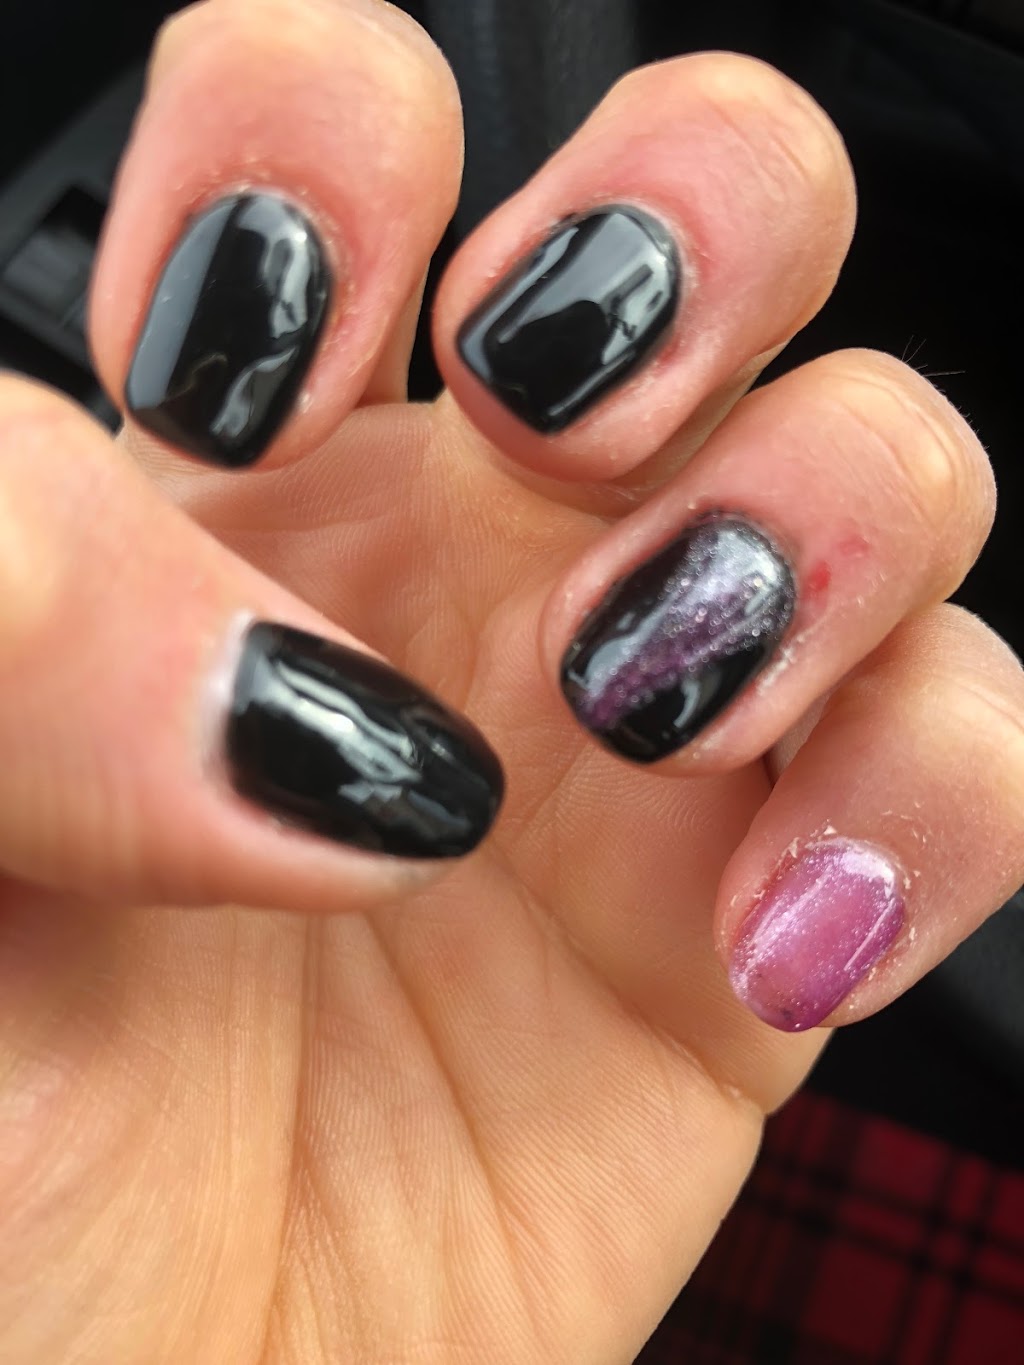 Martindale Nails Spa | Martindale Nails Spa, 211 Martindale Rd, St. Catharines, ON L2S 3V7, Canada | Phone: (905) 641-5558